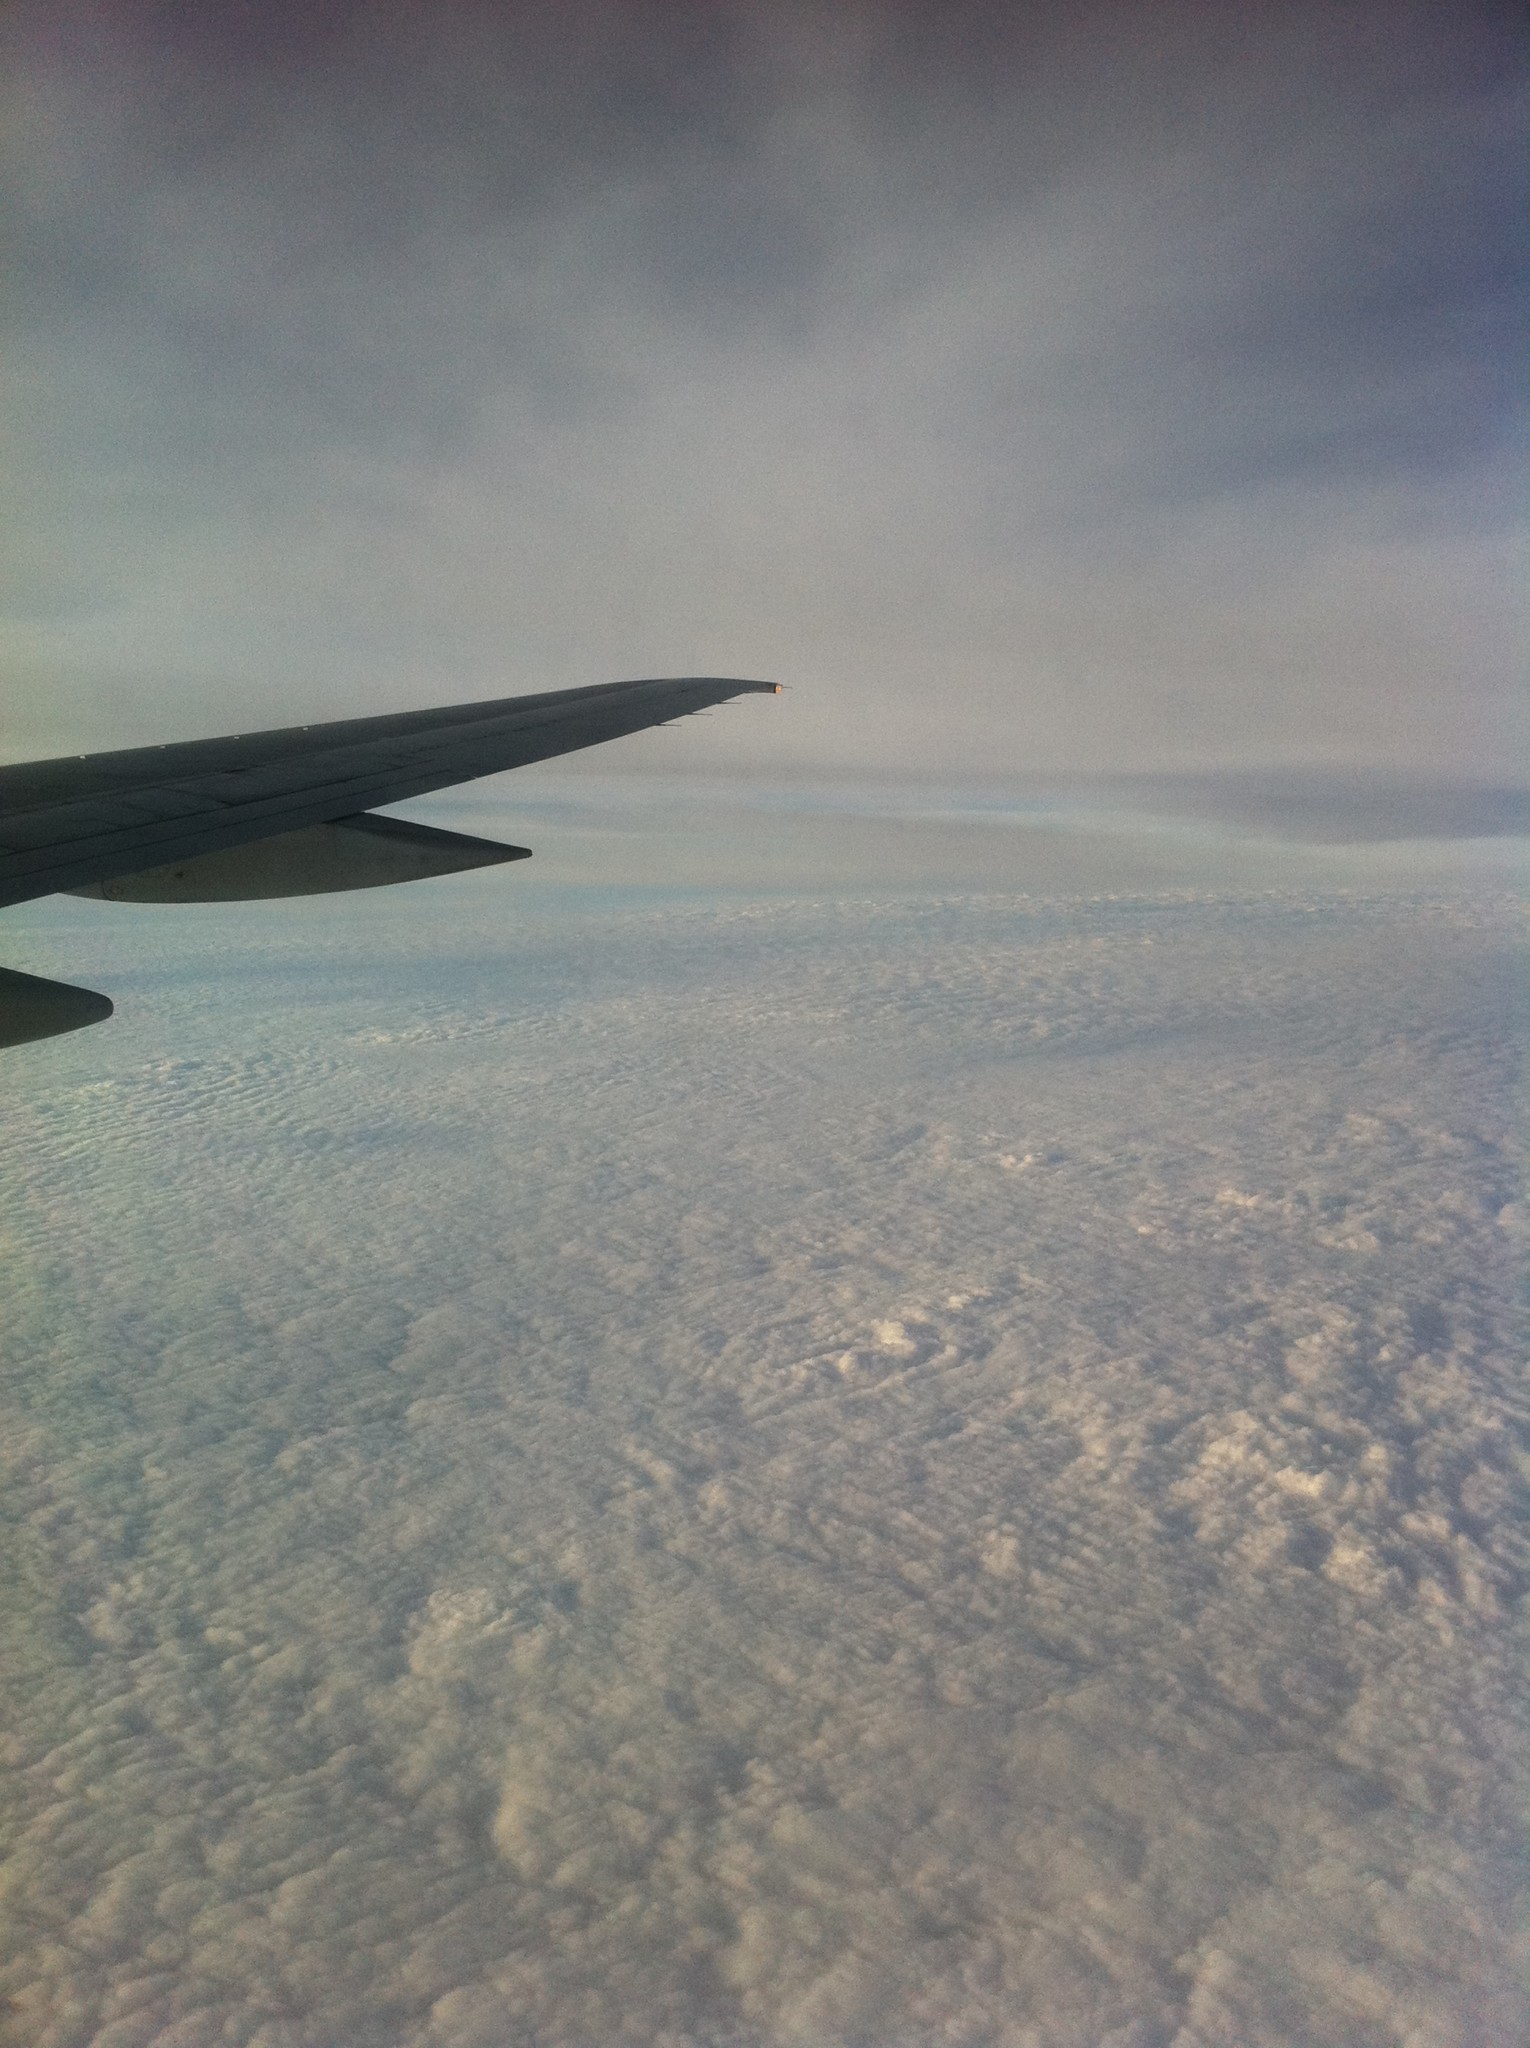 an airplane wing above clouds